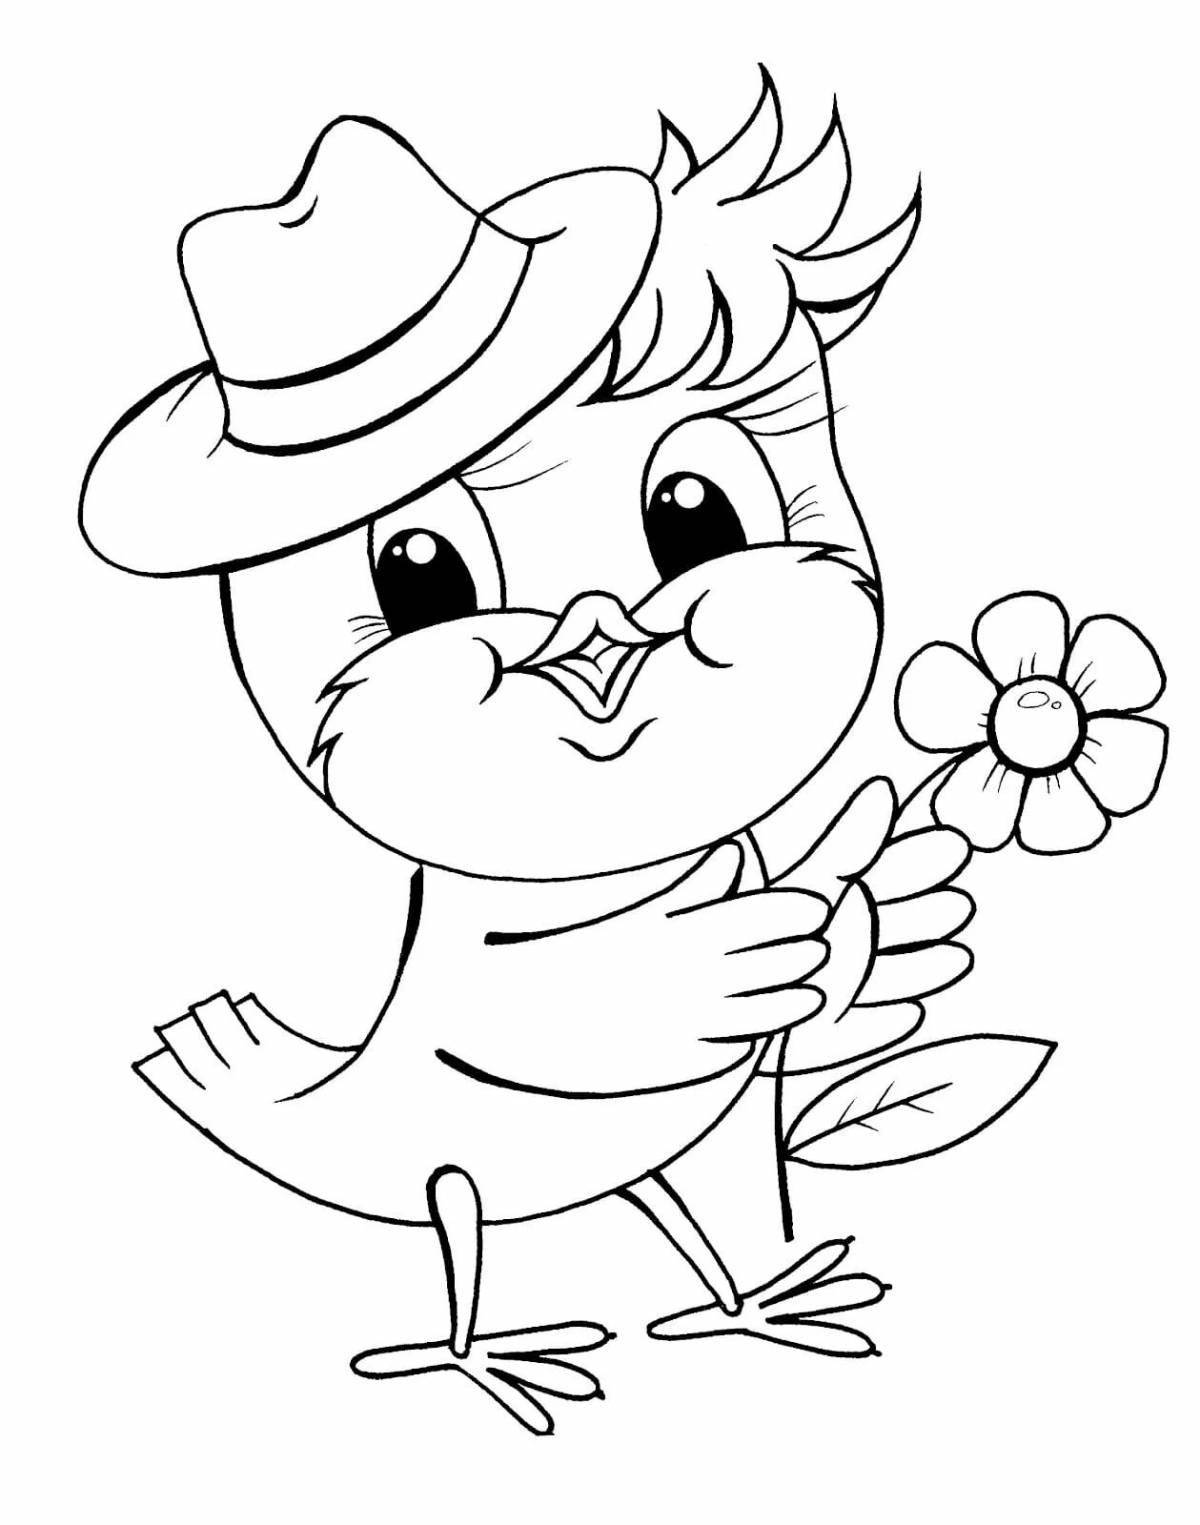 Perfect coloring page good quality